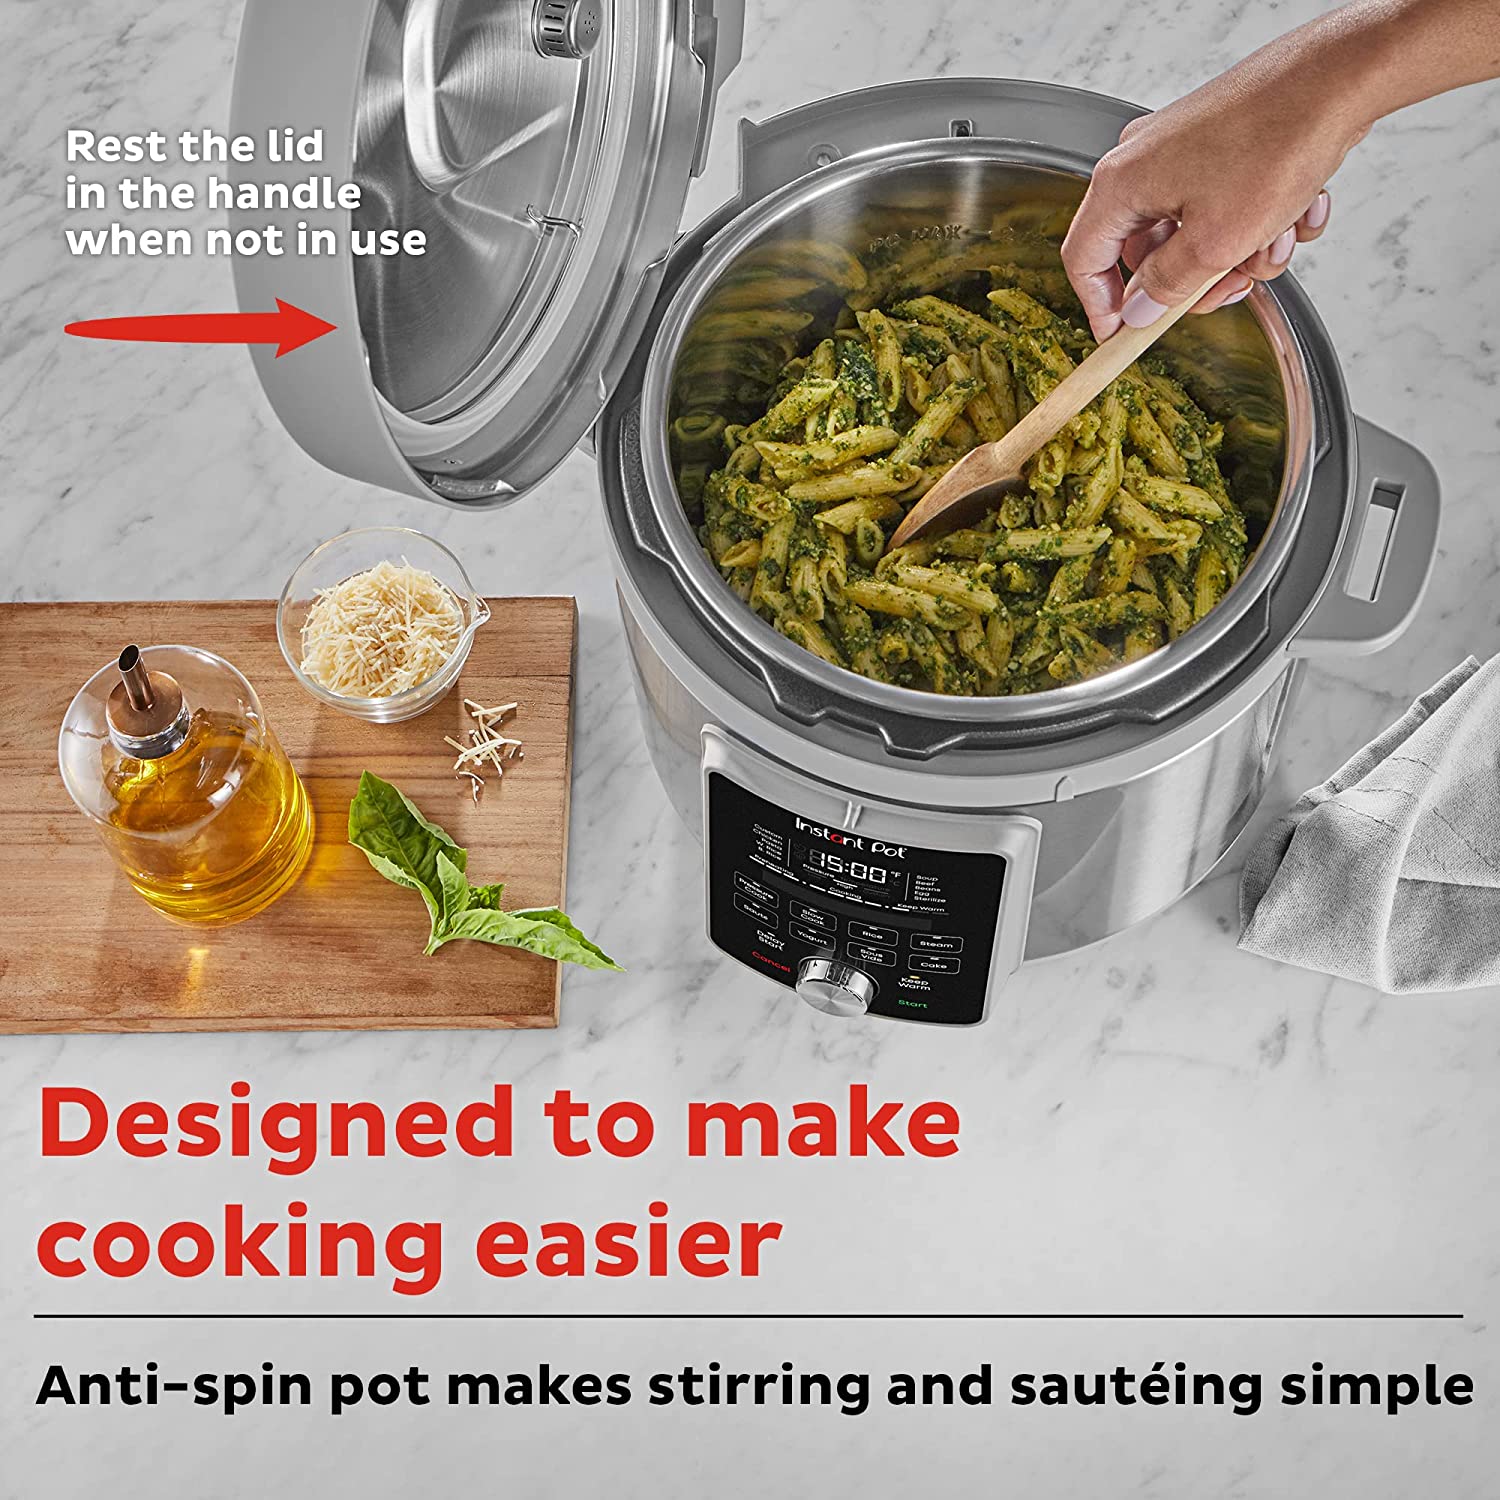 Instant Pot Duo Plus, 8-Quart Whisper Quiet 9-in-1 Electric Pressure Cooker,  Slow Cooker, Rice Cooker, Steamer, Sauté, Yogurt Maker, Warmer &  Sterilizer, App With Over 800 Recipes, Stainless Steel